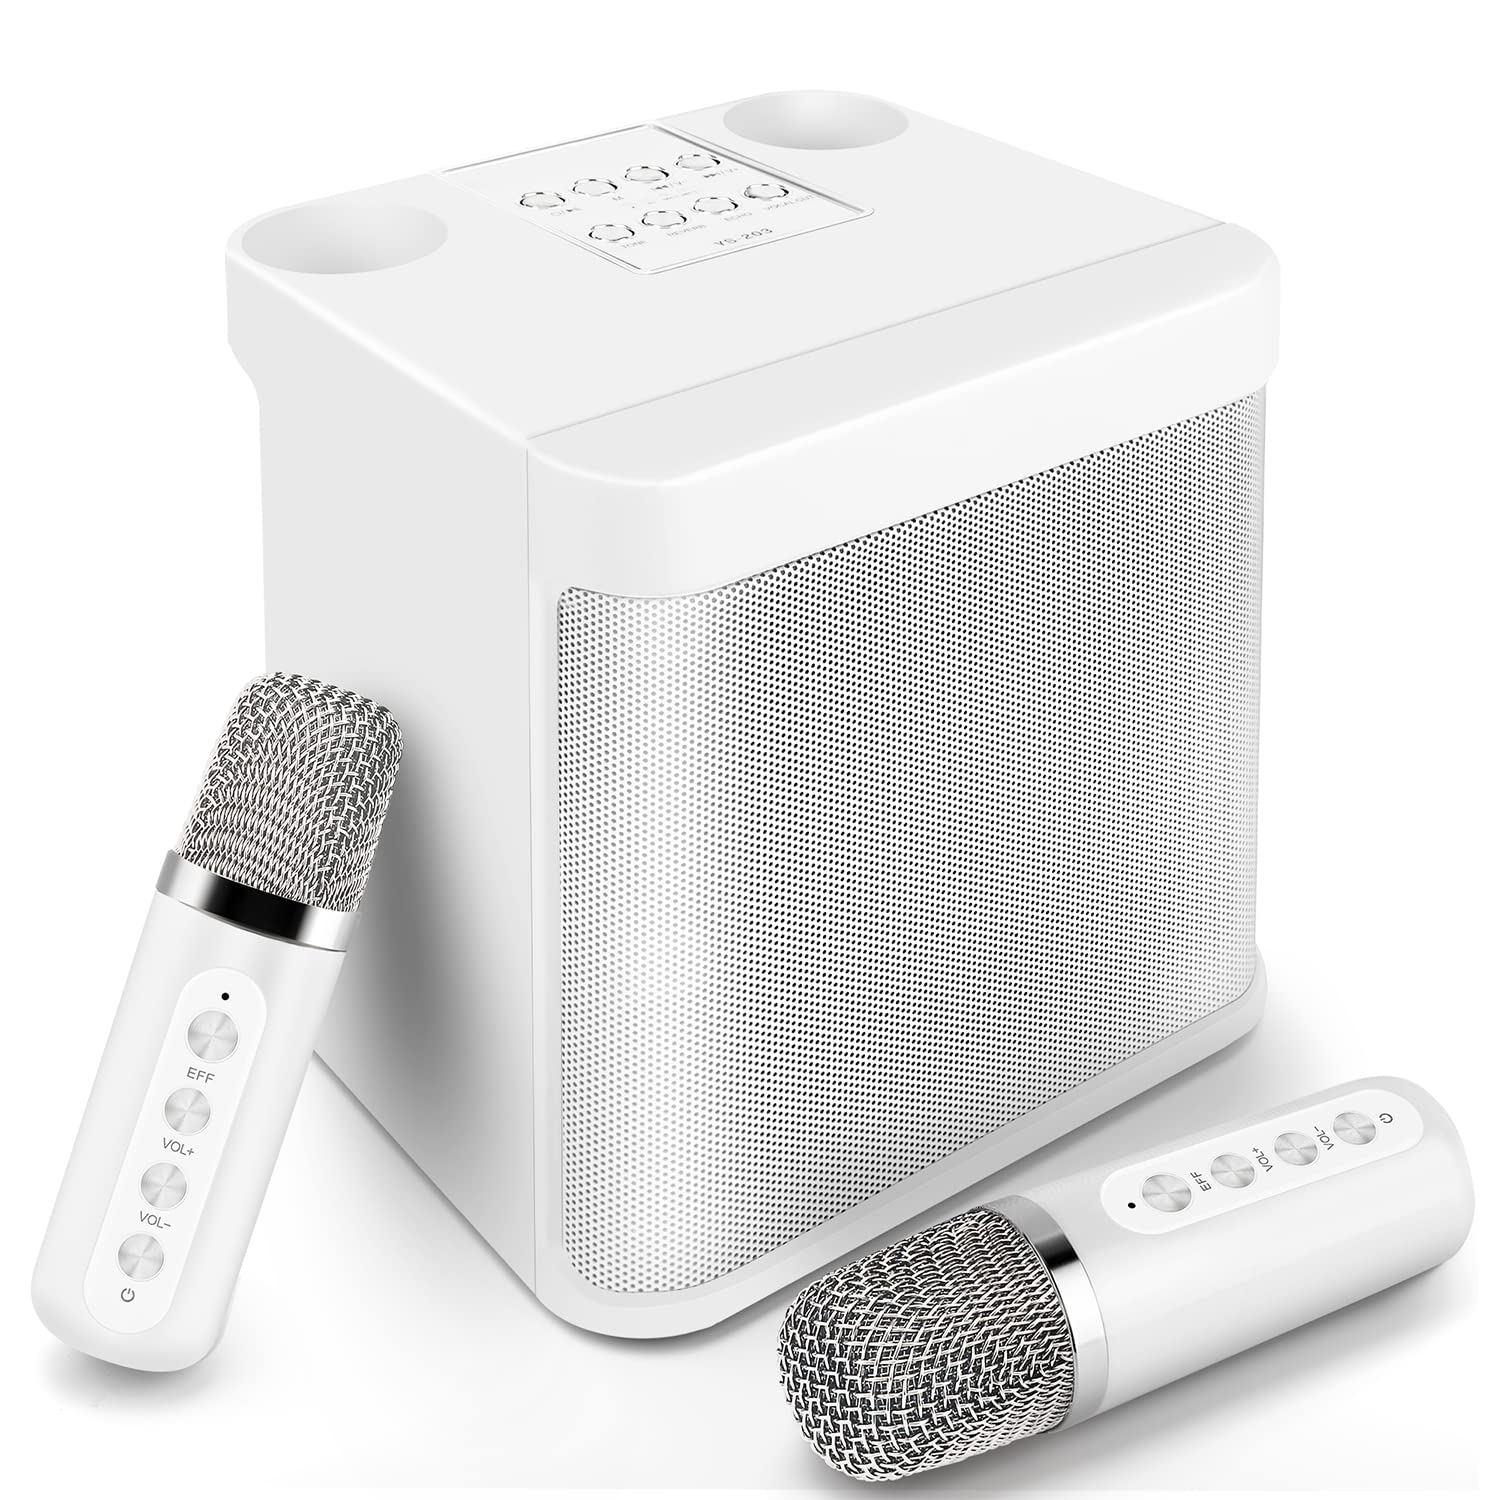 YS104 Multifunction Bluetooth Portable Mini Speaker Karaoke Machine  Wireless Microphone Supports Bluetooth / USB / TF Card for Home Party -  White Wholesale